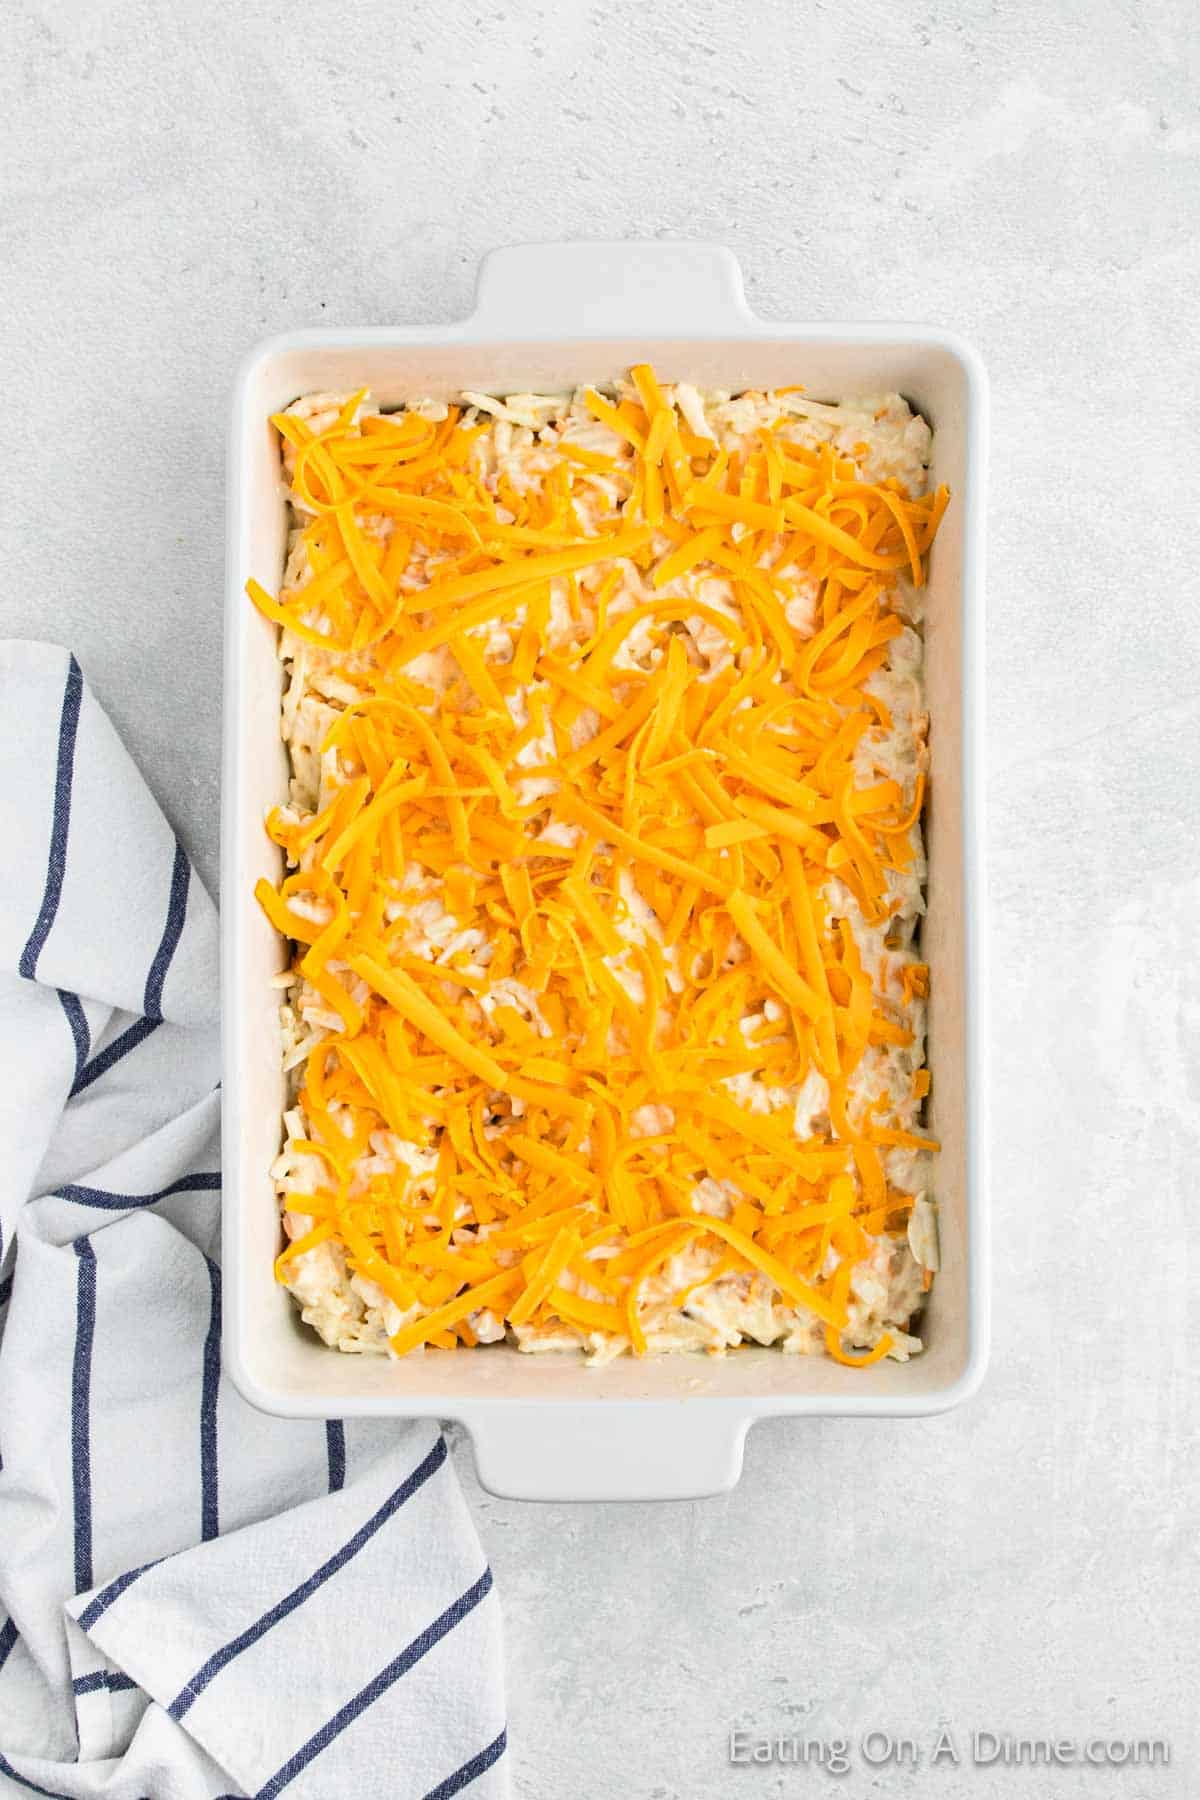 Shredded cheese topped with the potato casserole in the baking dish